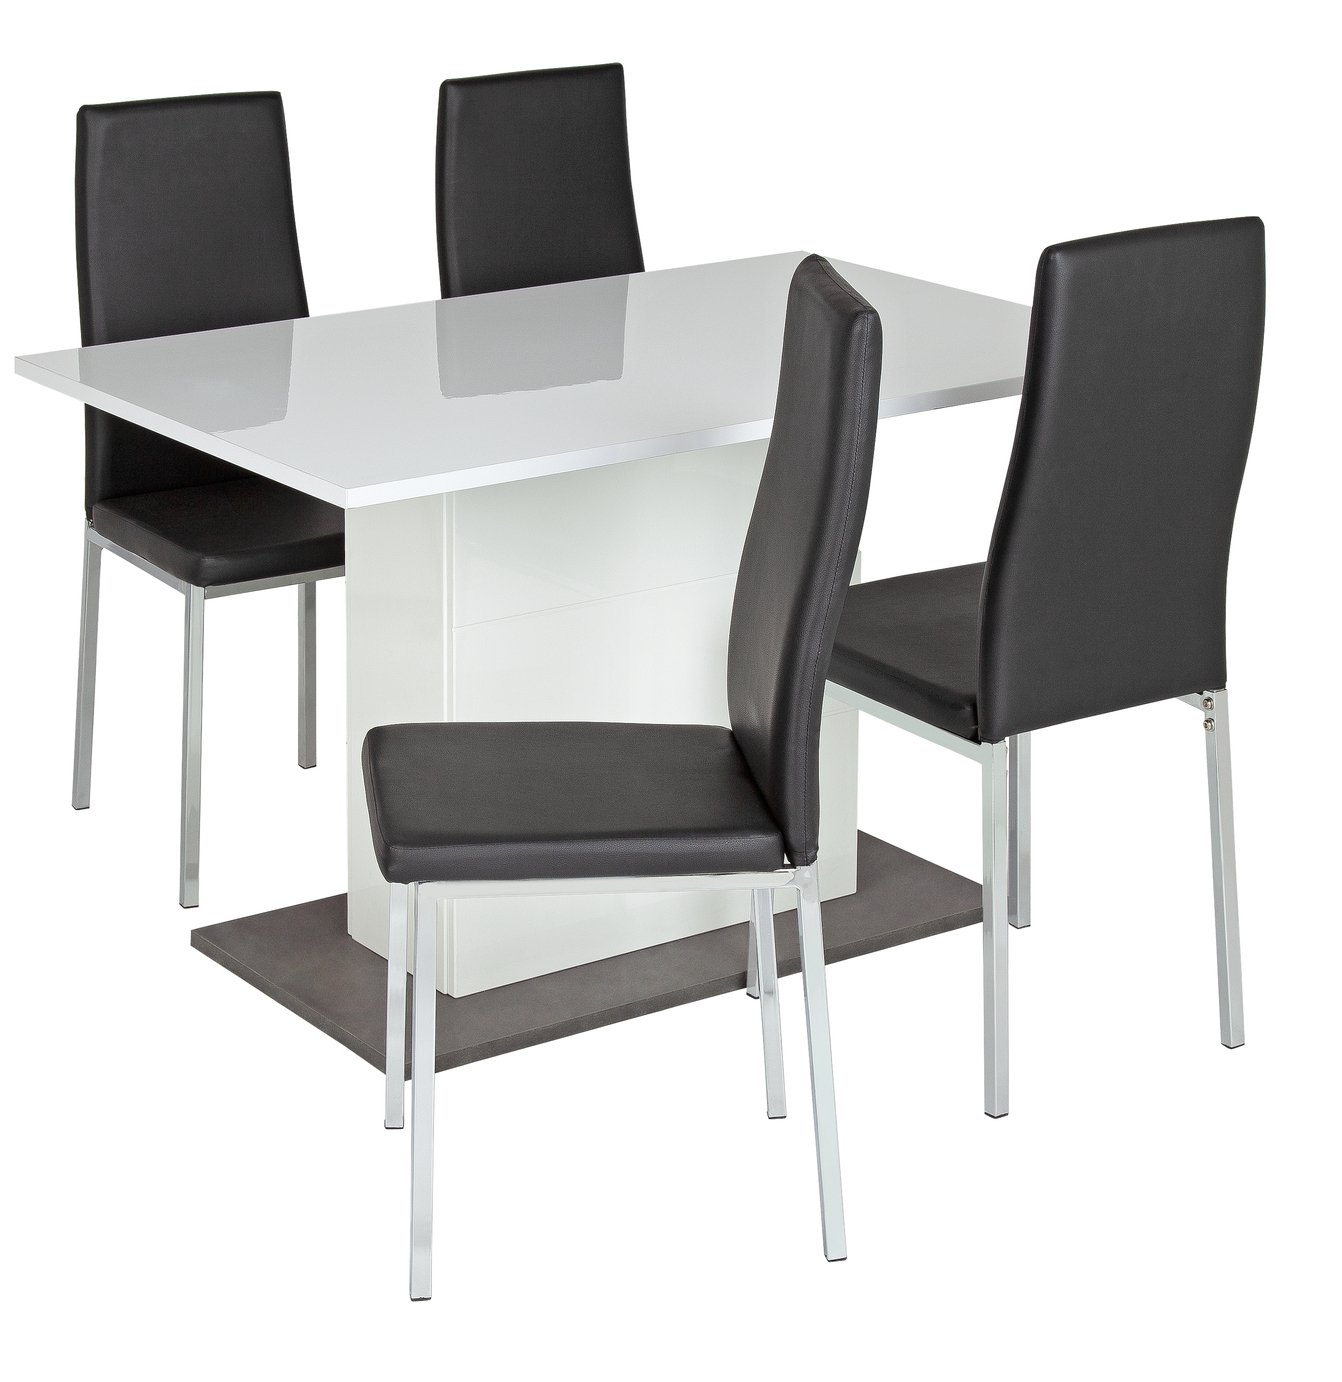 Argos Home Holborn White Gloss Dining Table & 4 Black Chairs